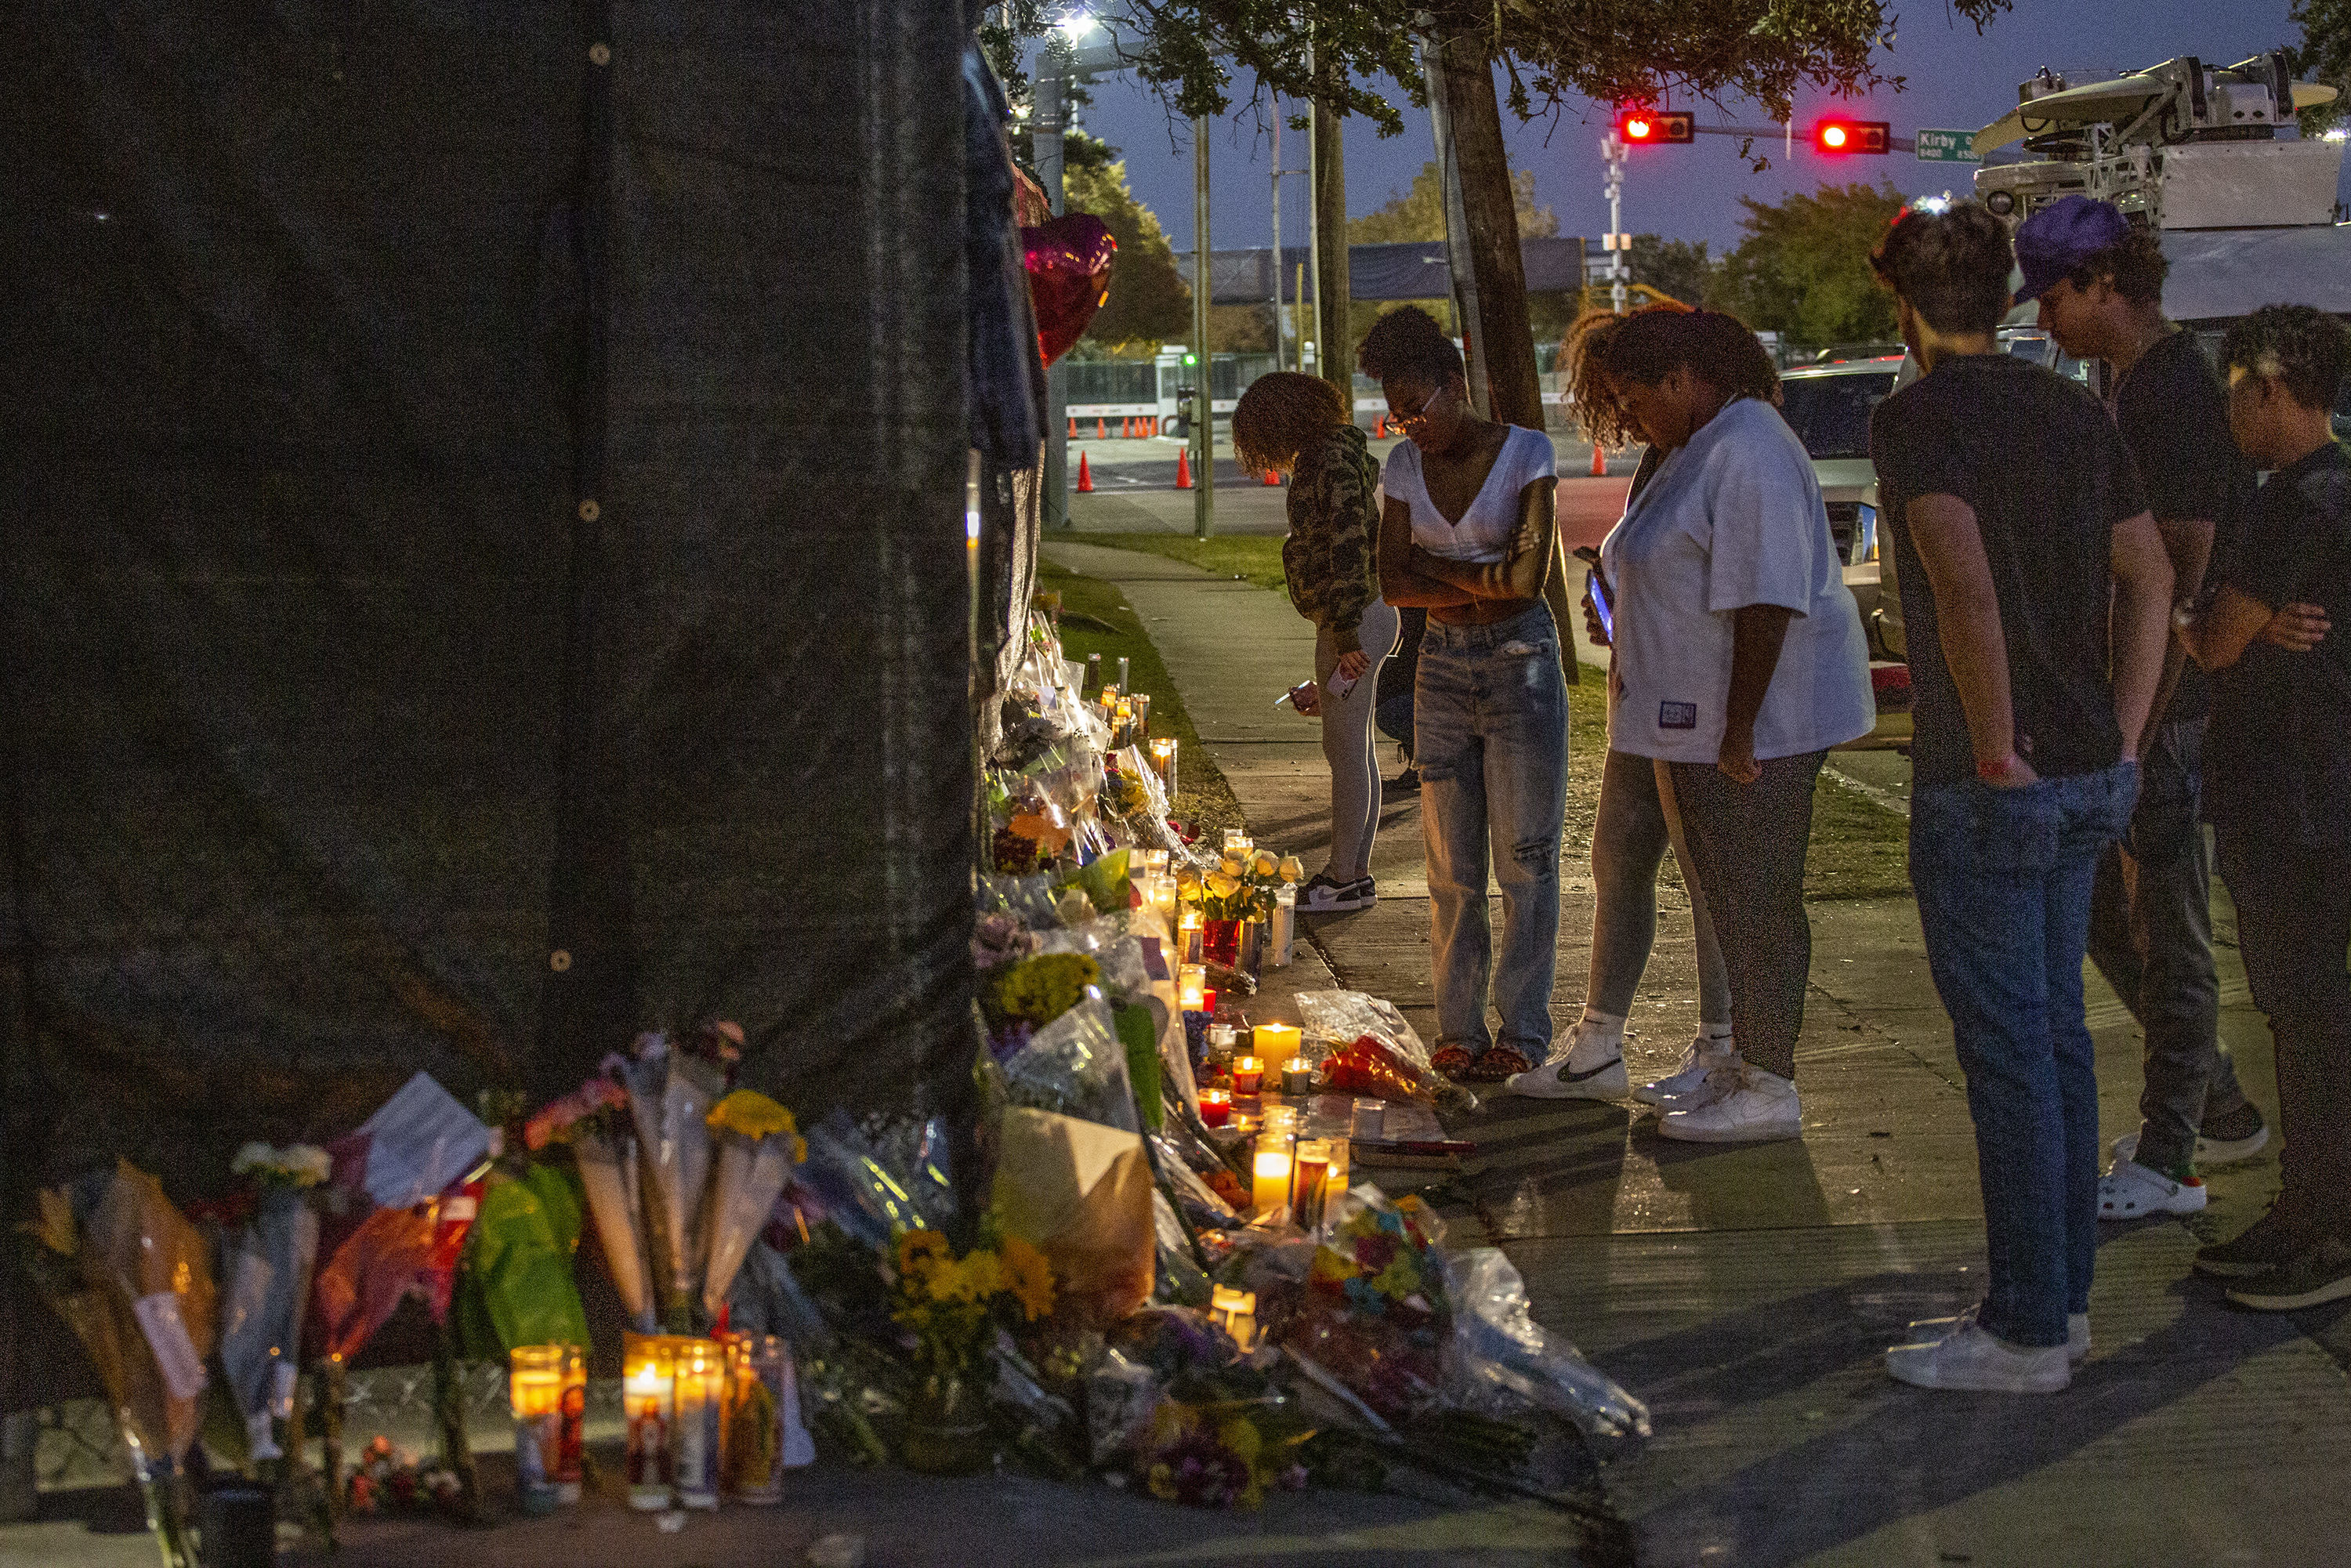 People attend a makeshift memorial on November 7, 2021 at the NRG Park grounds where ten people died in a crowd surge at the Astroworld Festival in Houston, Texas.